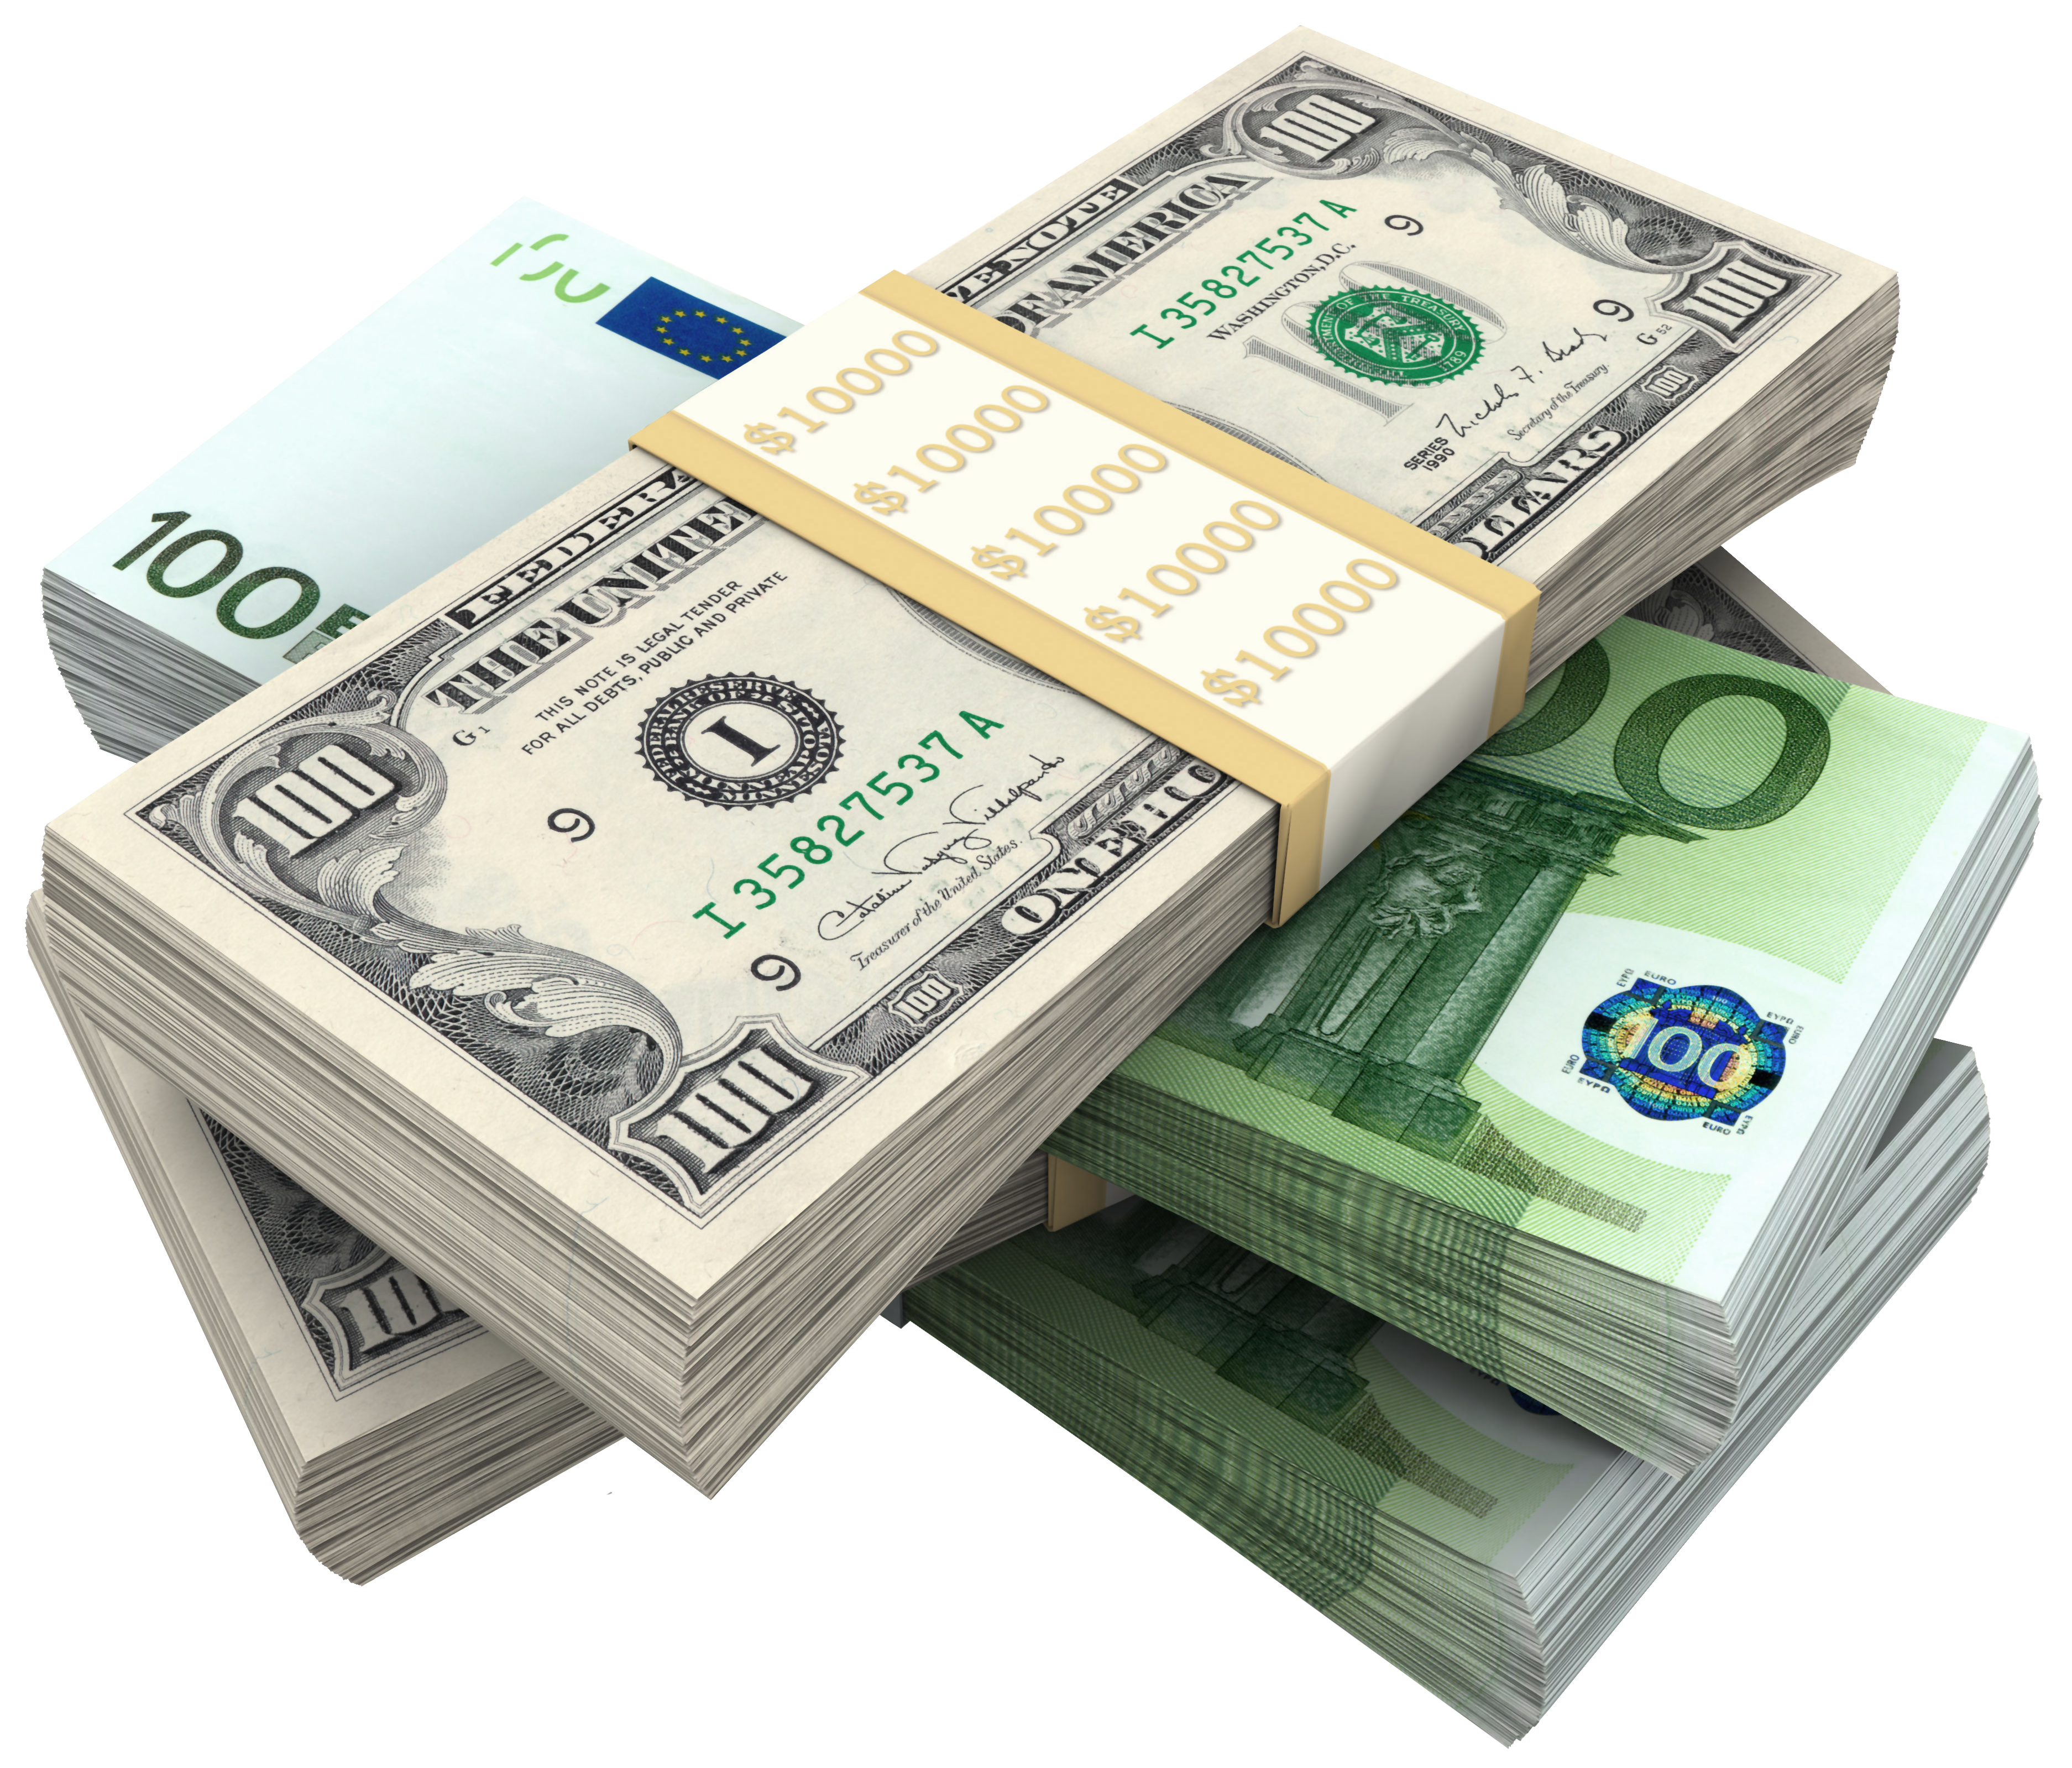 Bundles Of Dollars and Euro PNG Clipart Picture